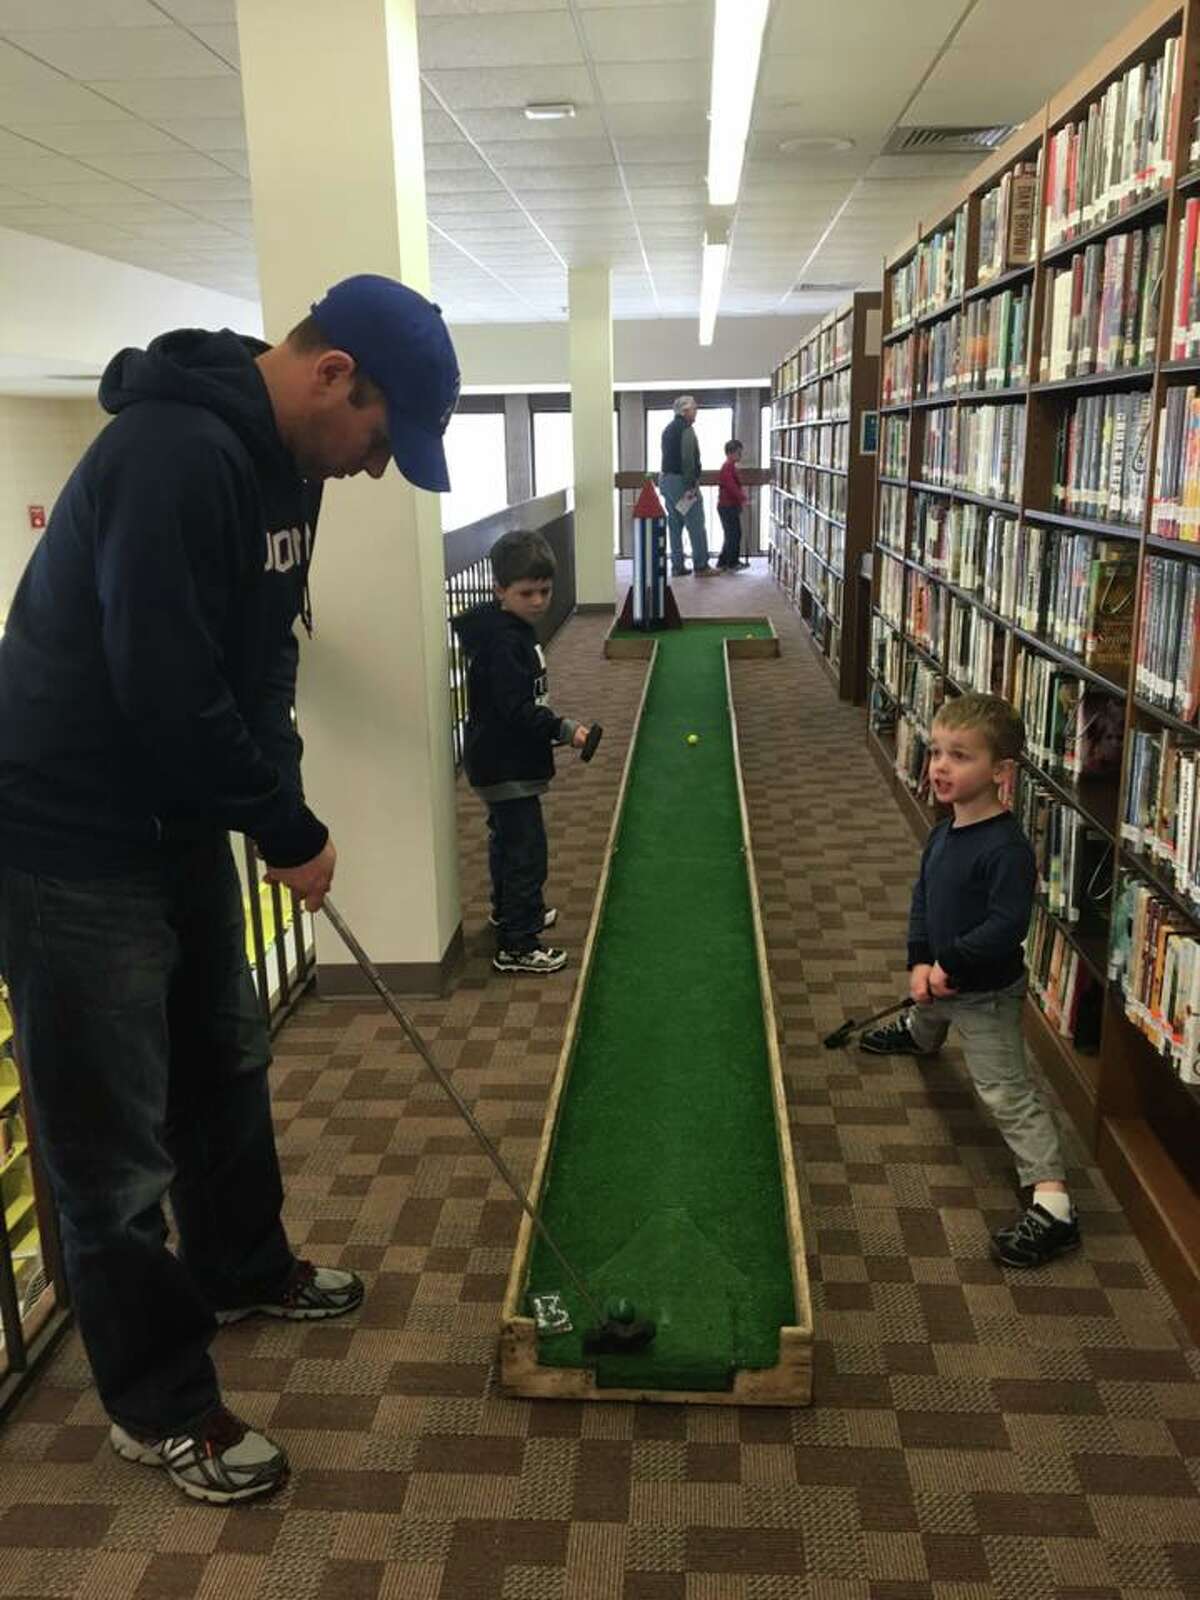 A father teacher his son how to put at one of the 18 holes set up at the Trumbull Library Monday afternoon.